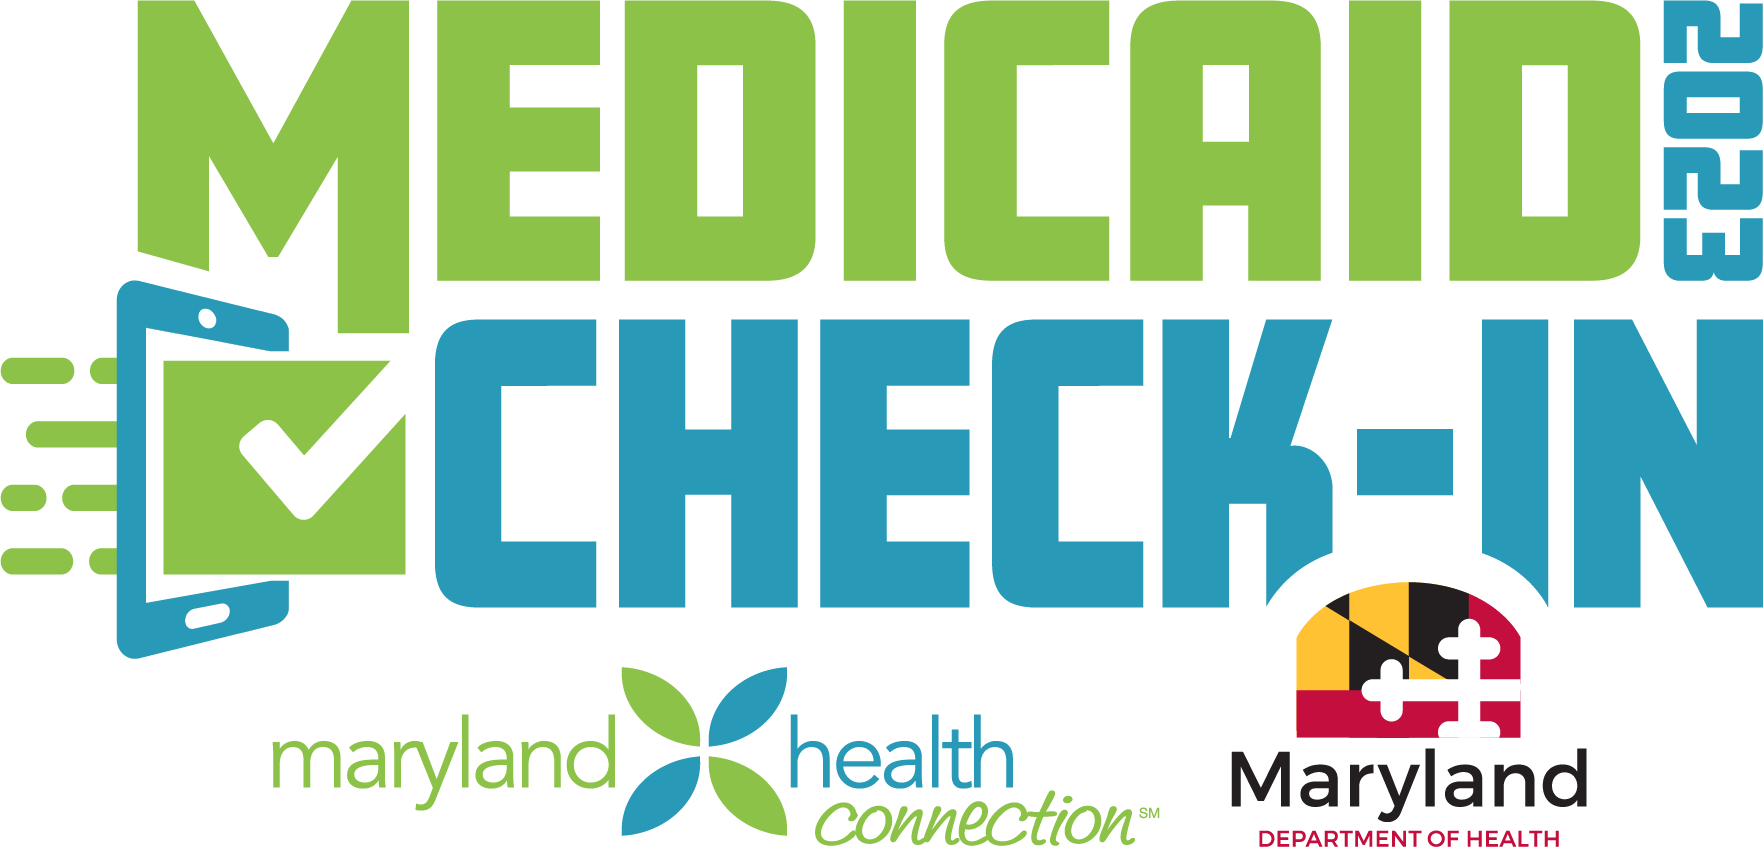 Medicaid Check-In